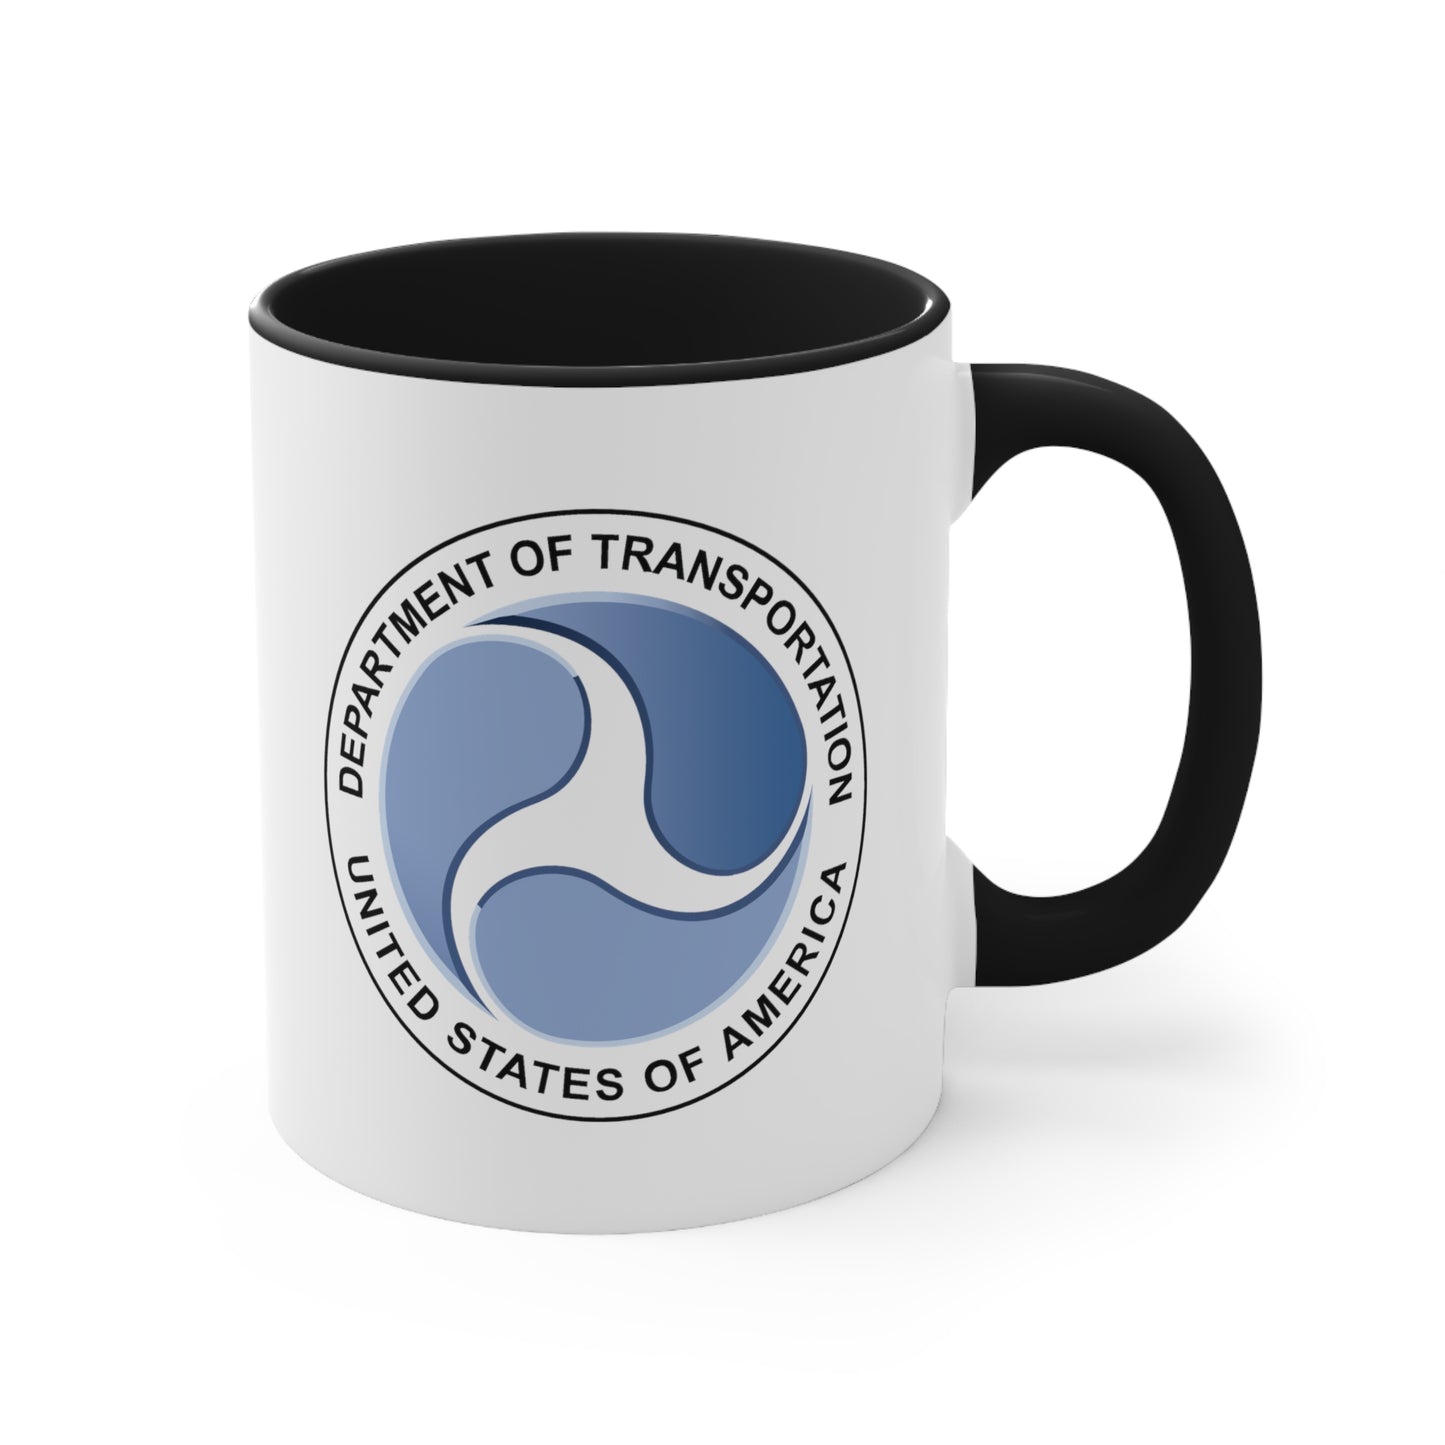 Department of Transportation Coffee Mug - Double Sided Black Accent 11oz by TheGlassyLass.com